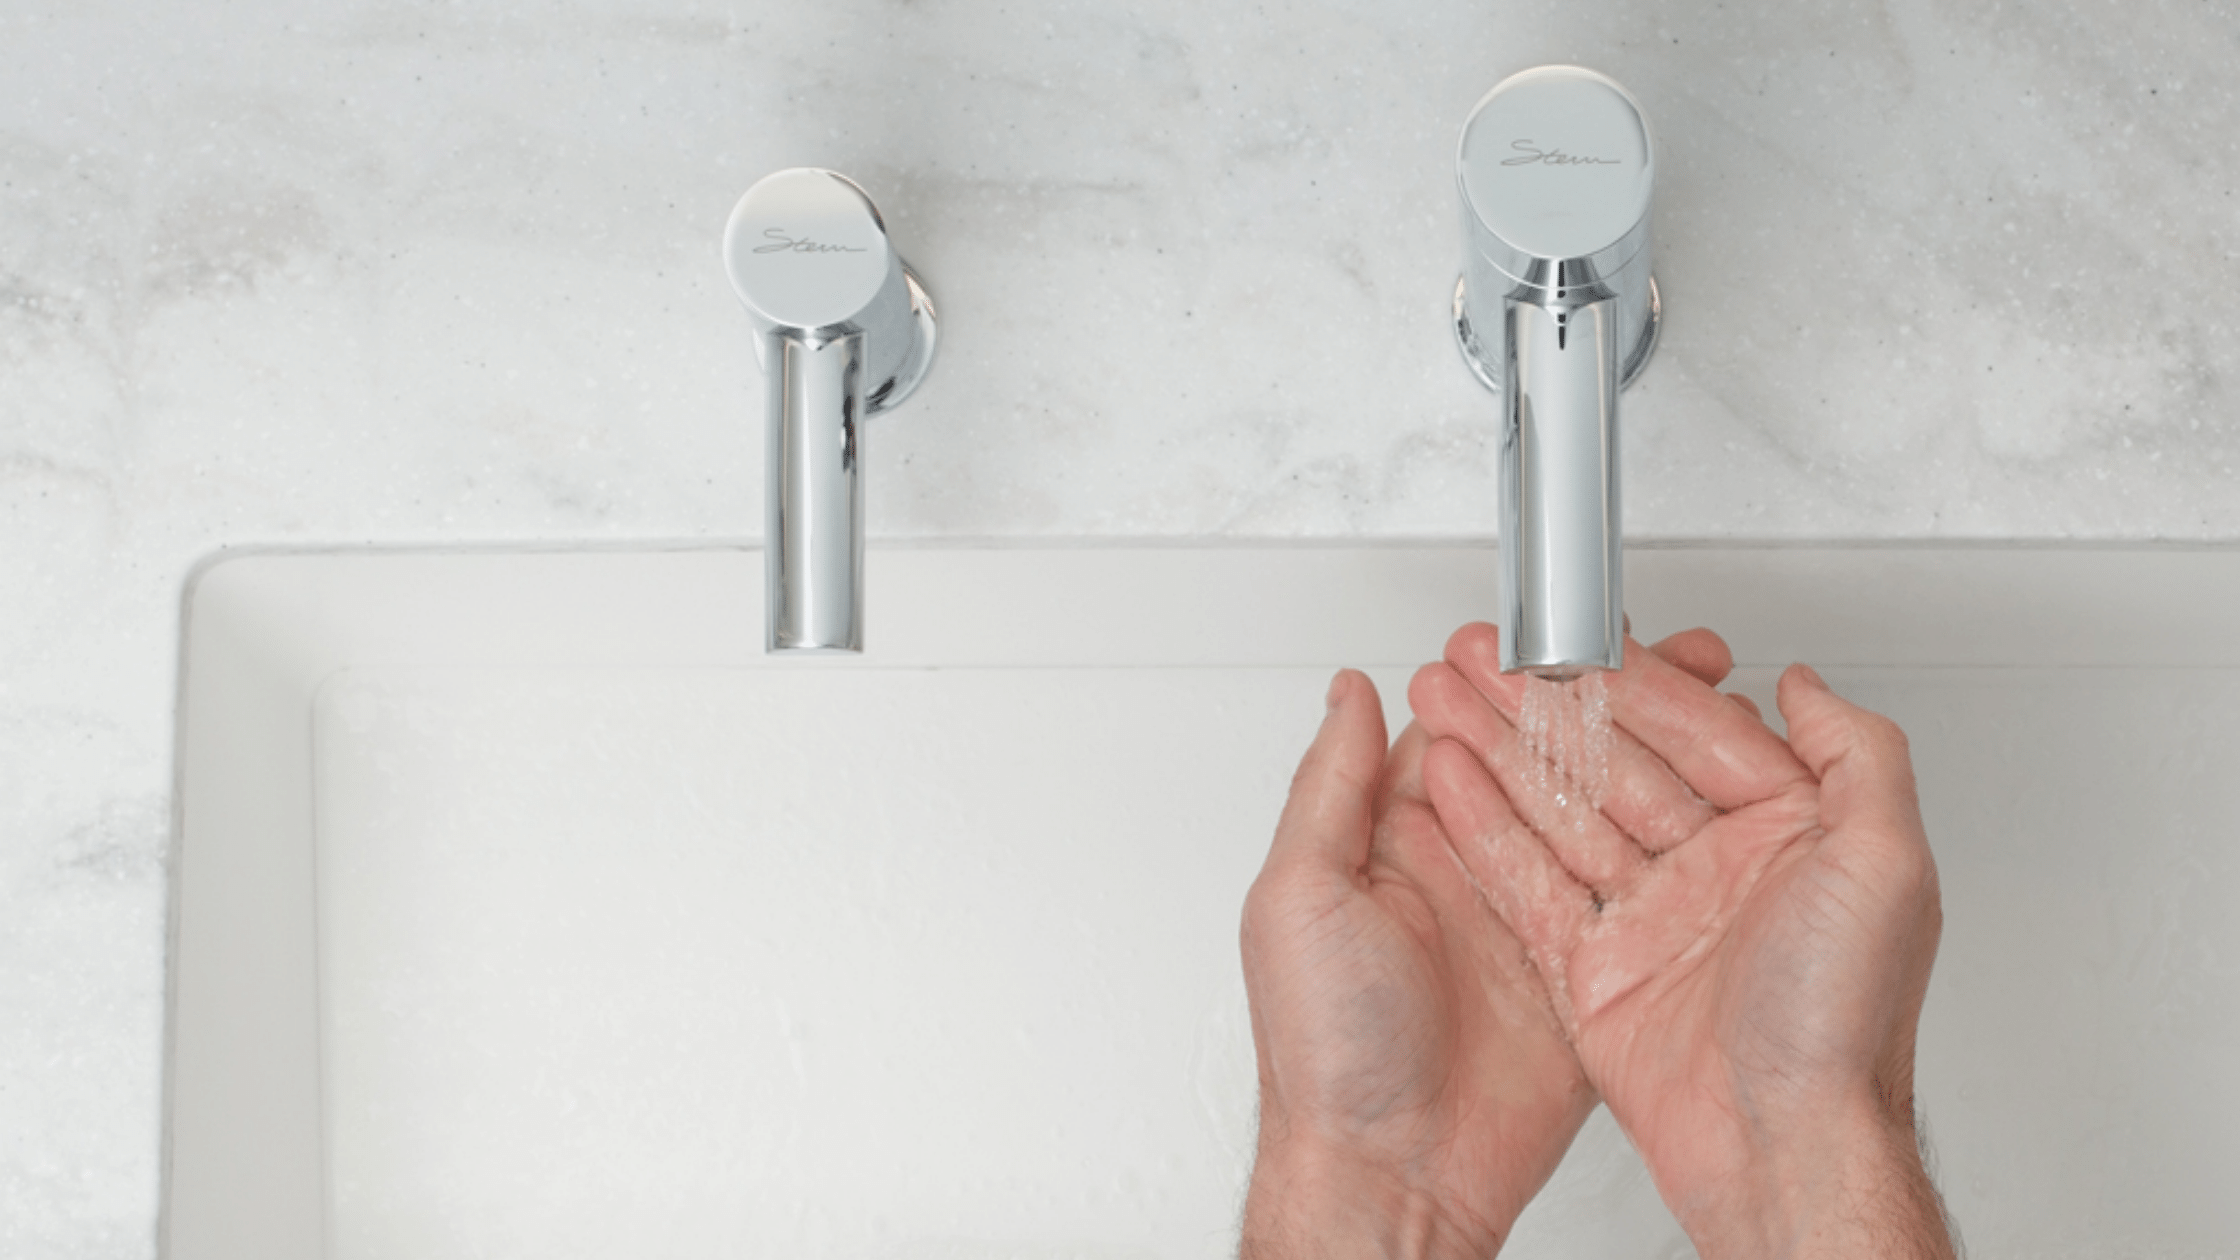 touch free faucets